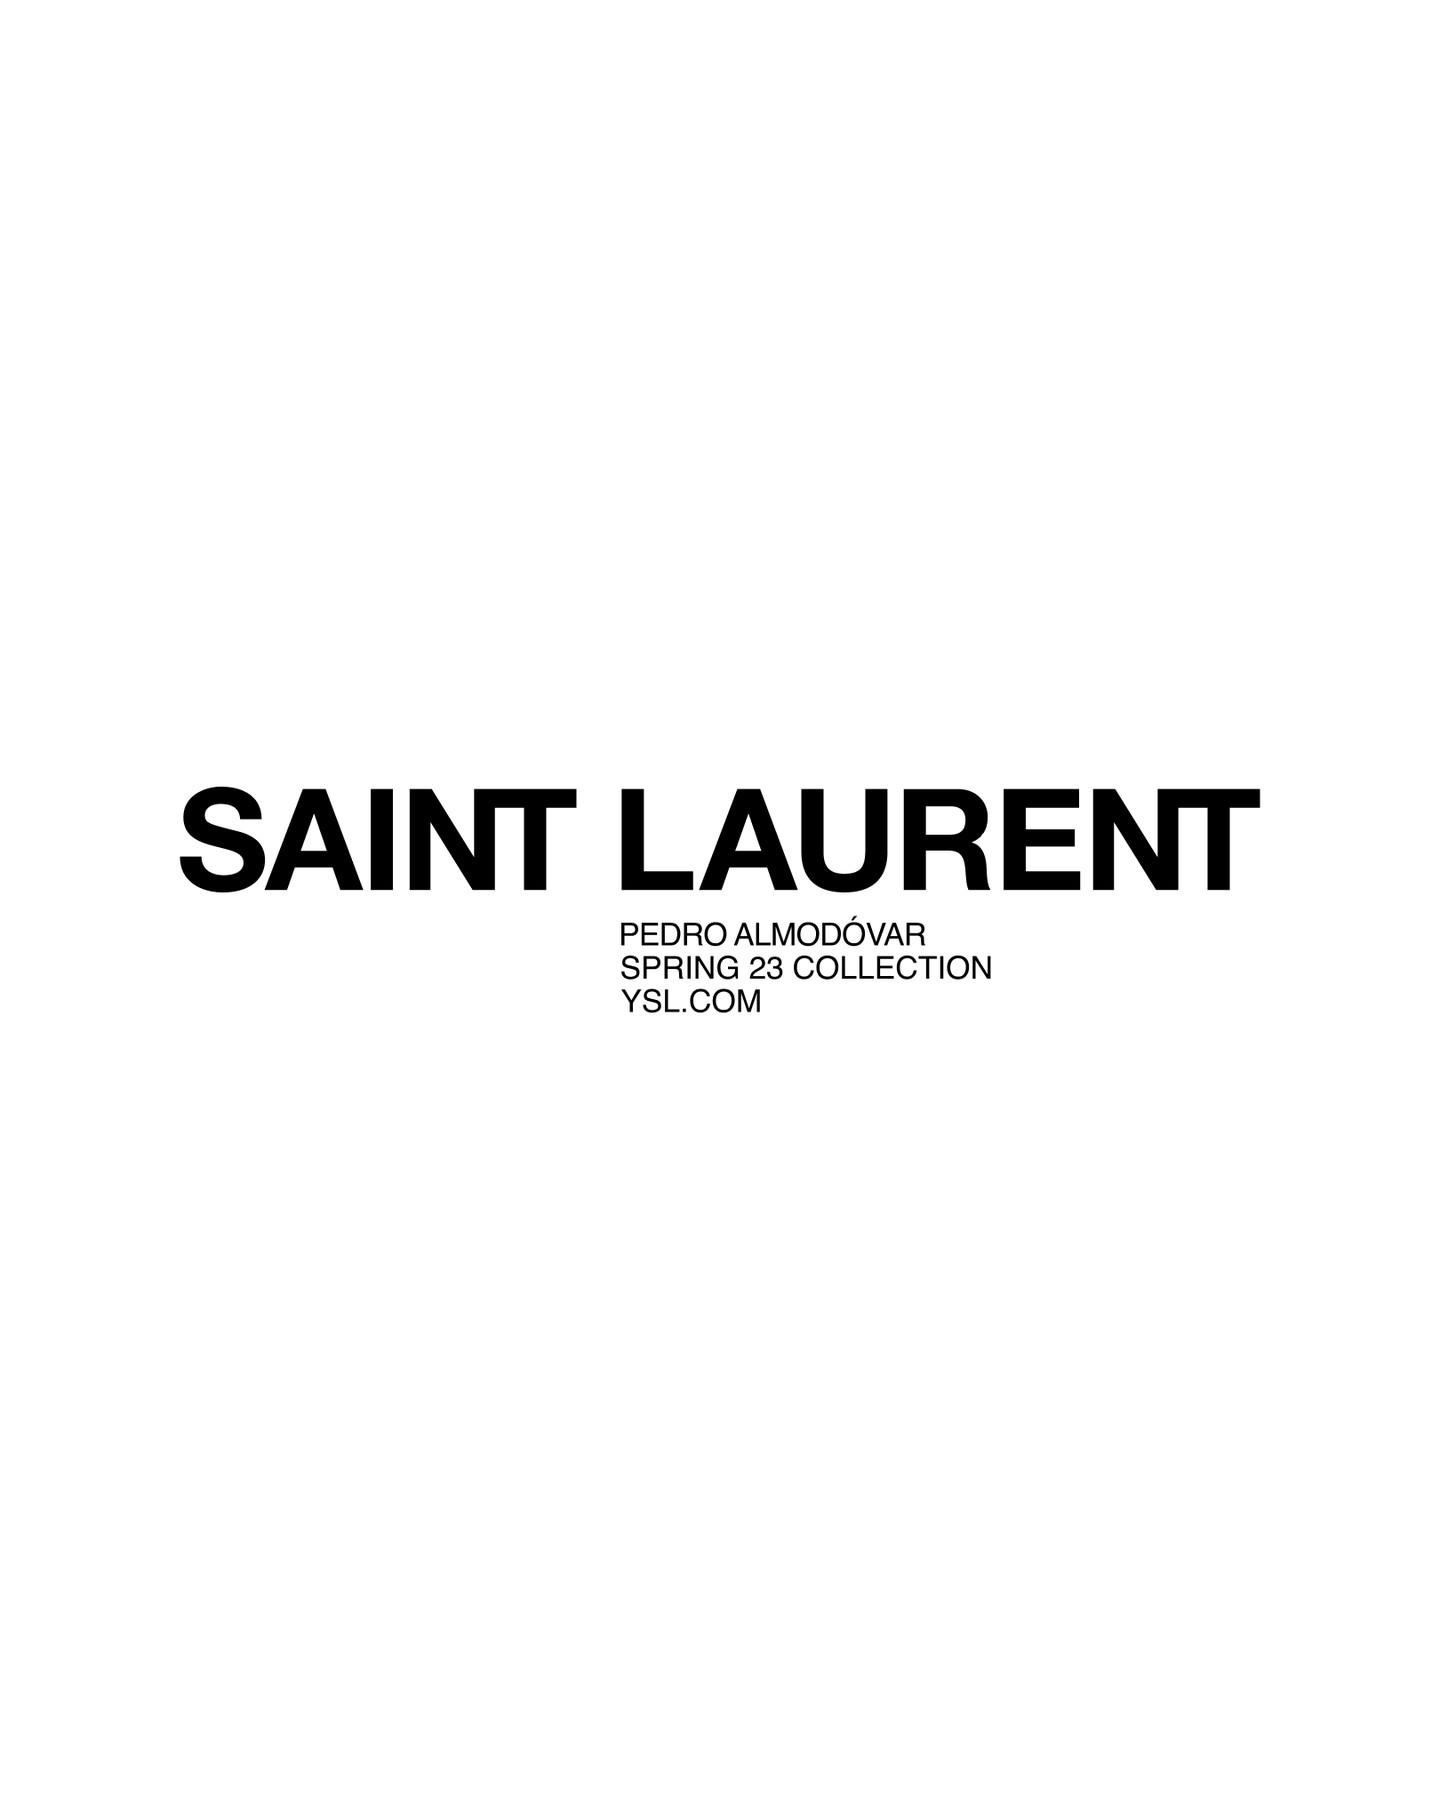 SAINT LAURENT - The Director’s Cut⁣by Anthony Vaccarello⁣Pedro Almodóvar⁣Photographed by David Sims⁣